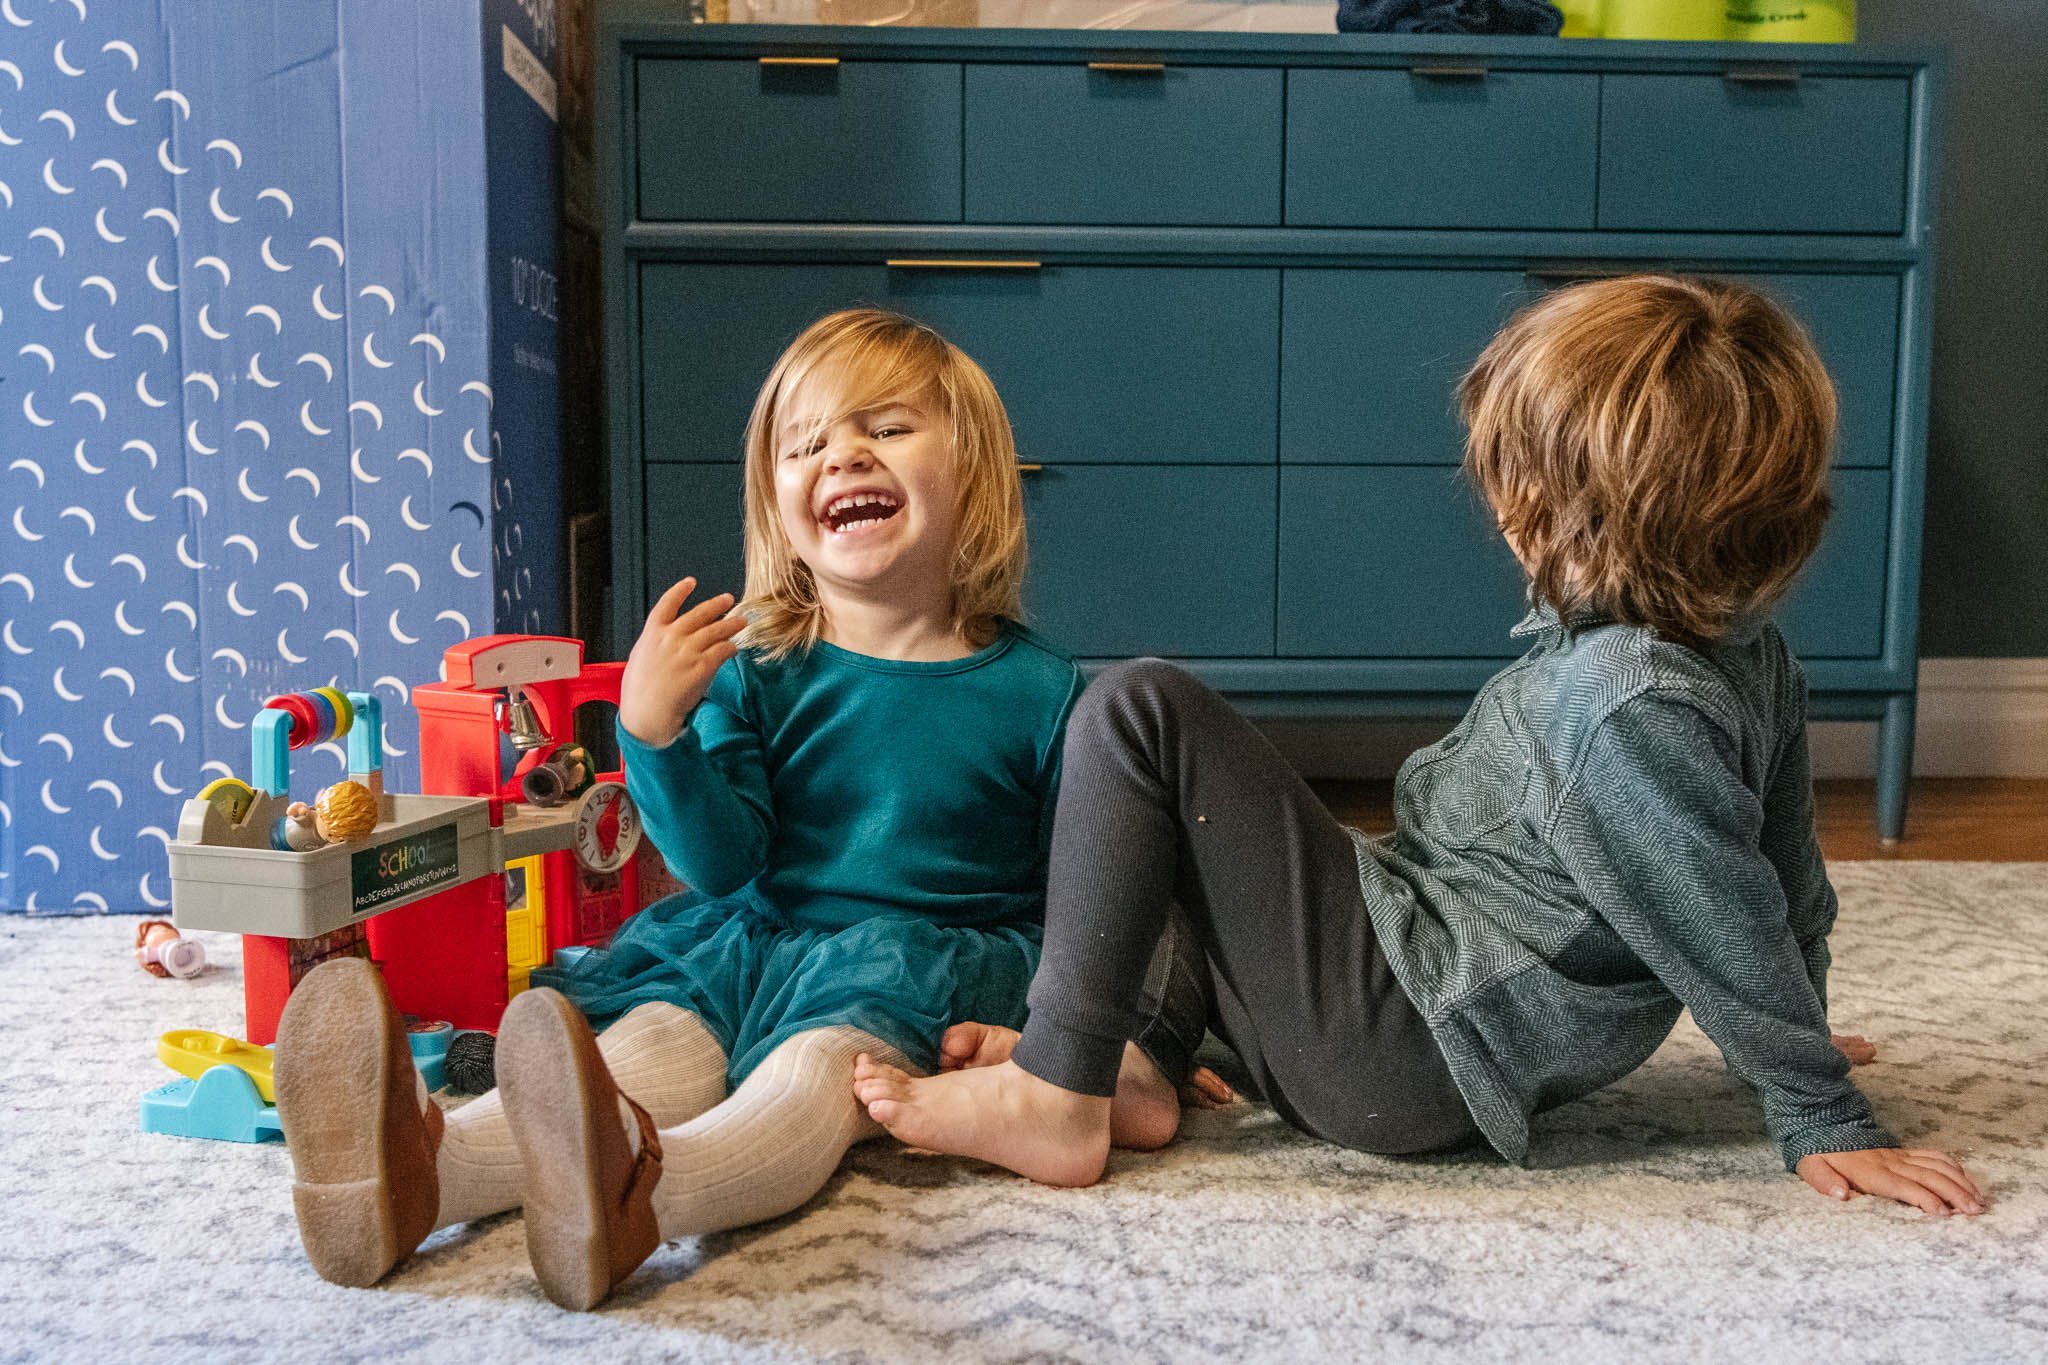  Nicole Hawkins Photography captures a candid moment between sibling playing and laughing in their bedroom. candid sibling pictures kids playing portraits #NicoleHawkinsPhotography #NicoleHawkinsFamilies #NJphotographers #familyphotos #CentralParkPho